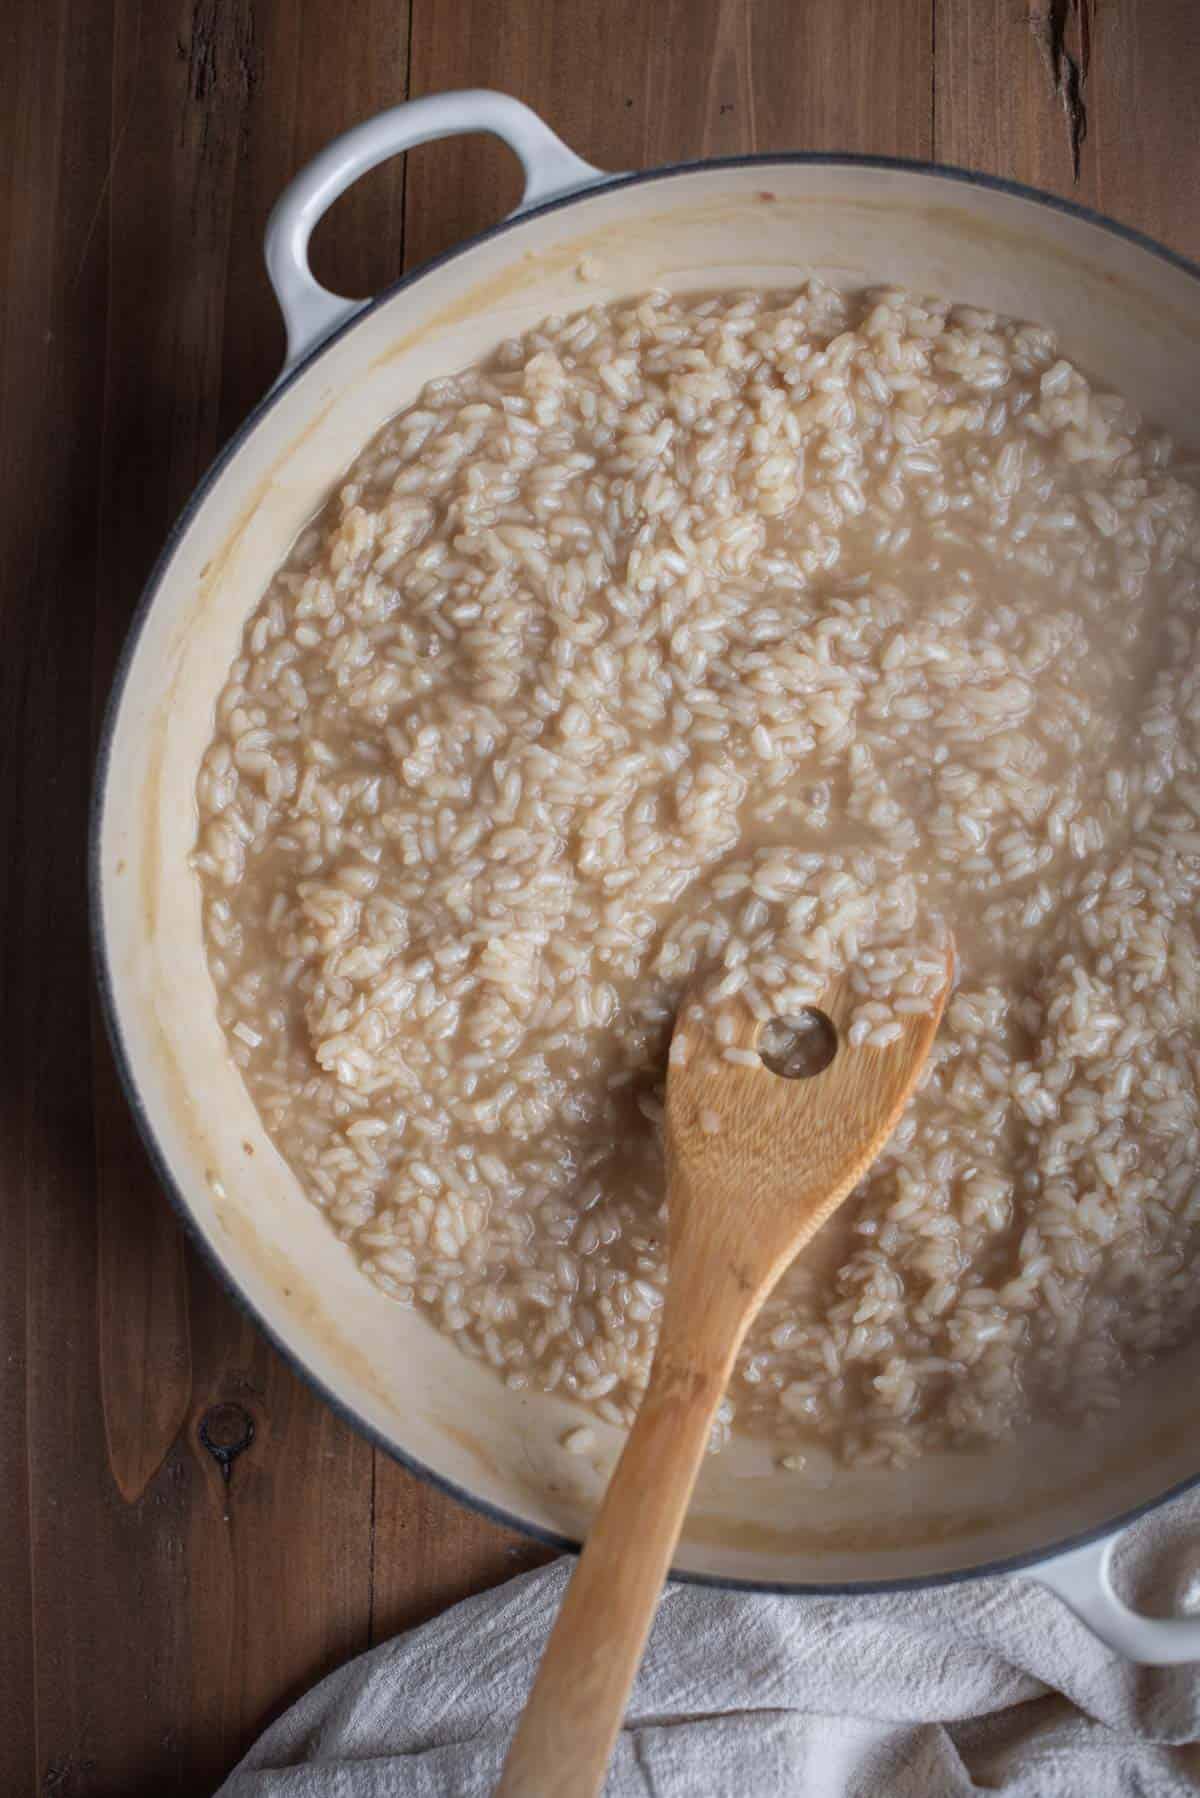 A white skillet containing cooking risotto. The mixture looks quite liquidy at this stage. A wooden spoon is lifting some of the mixture out of the pan.